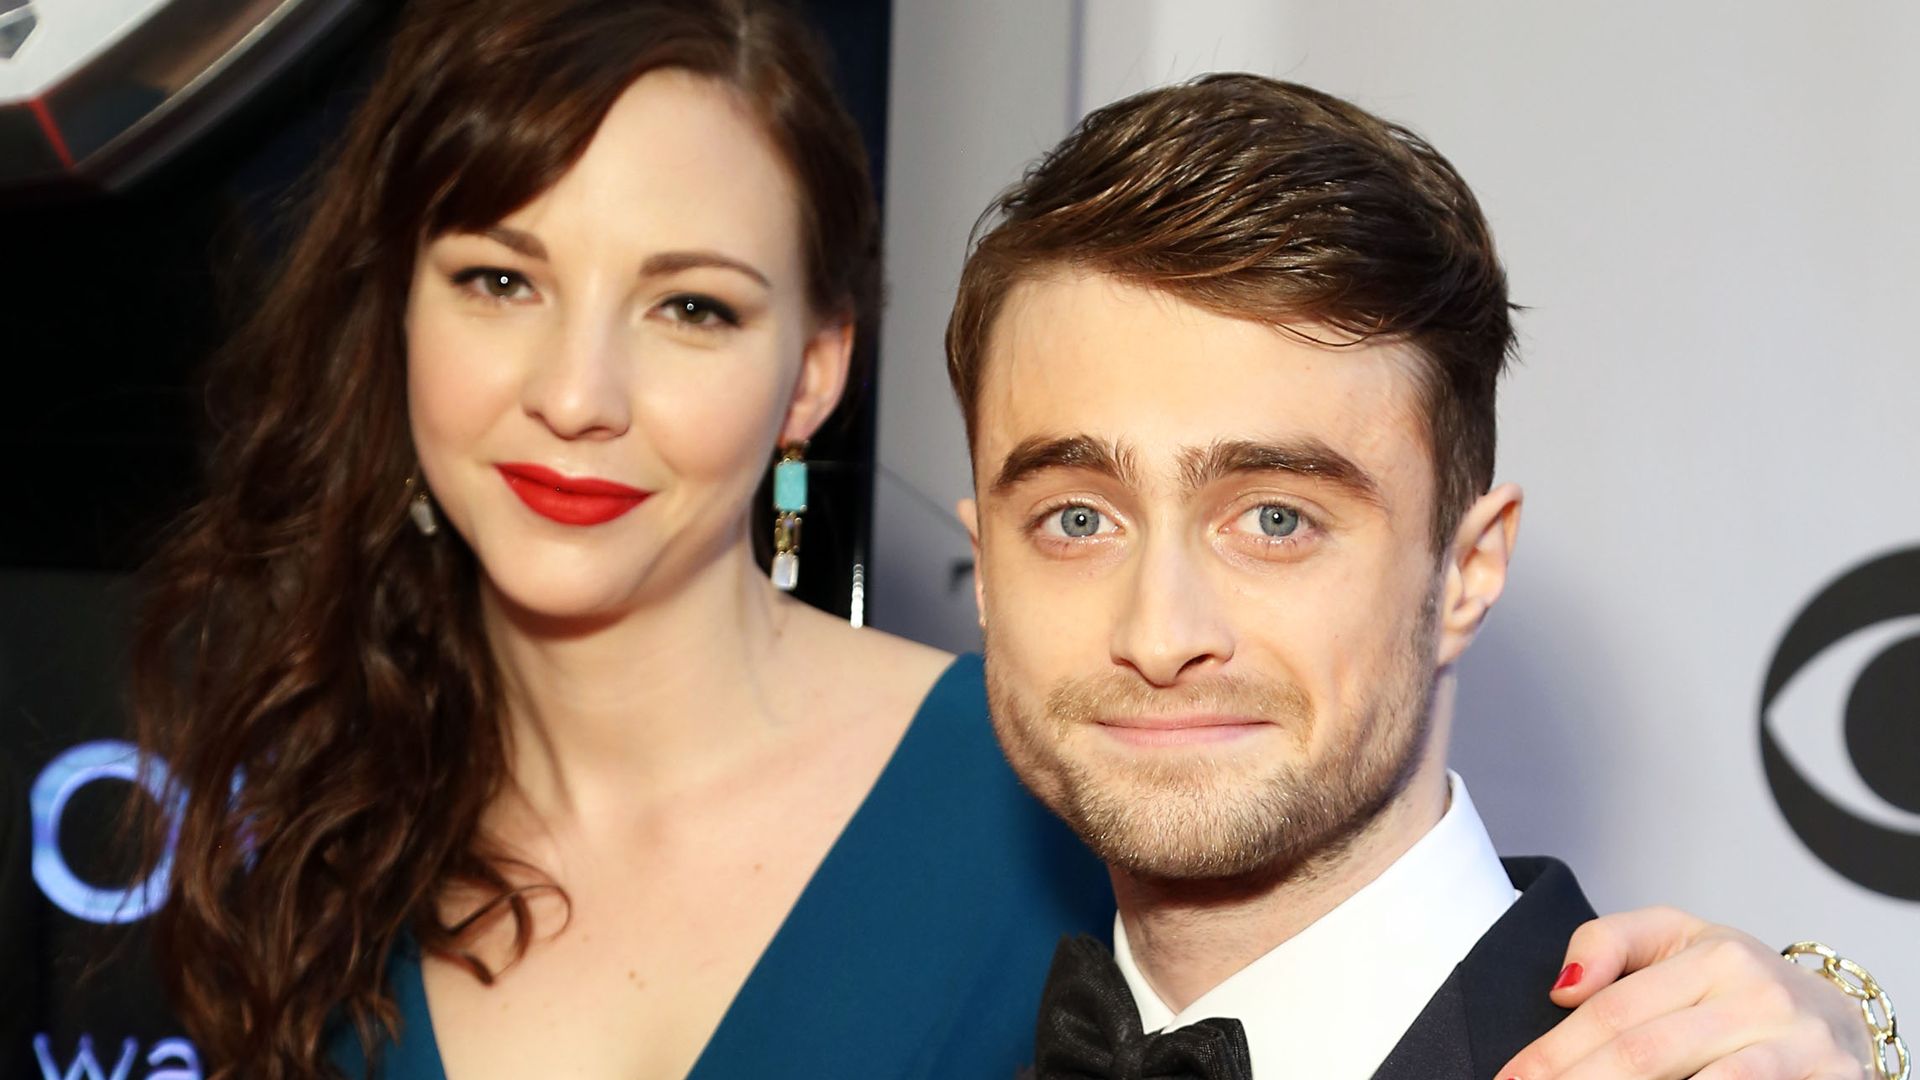 Daniel Radcliffe leaves baby at home with girlfriend Erin Darke for special wedding appearance